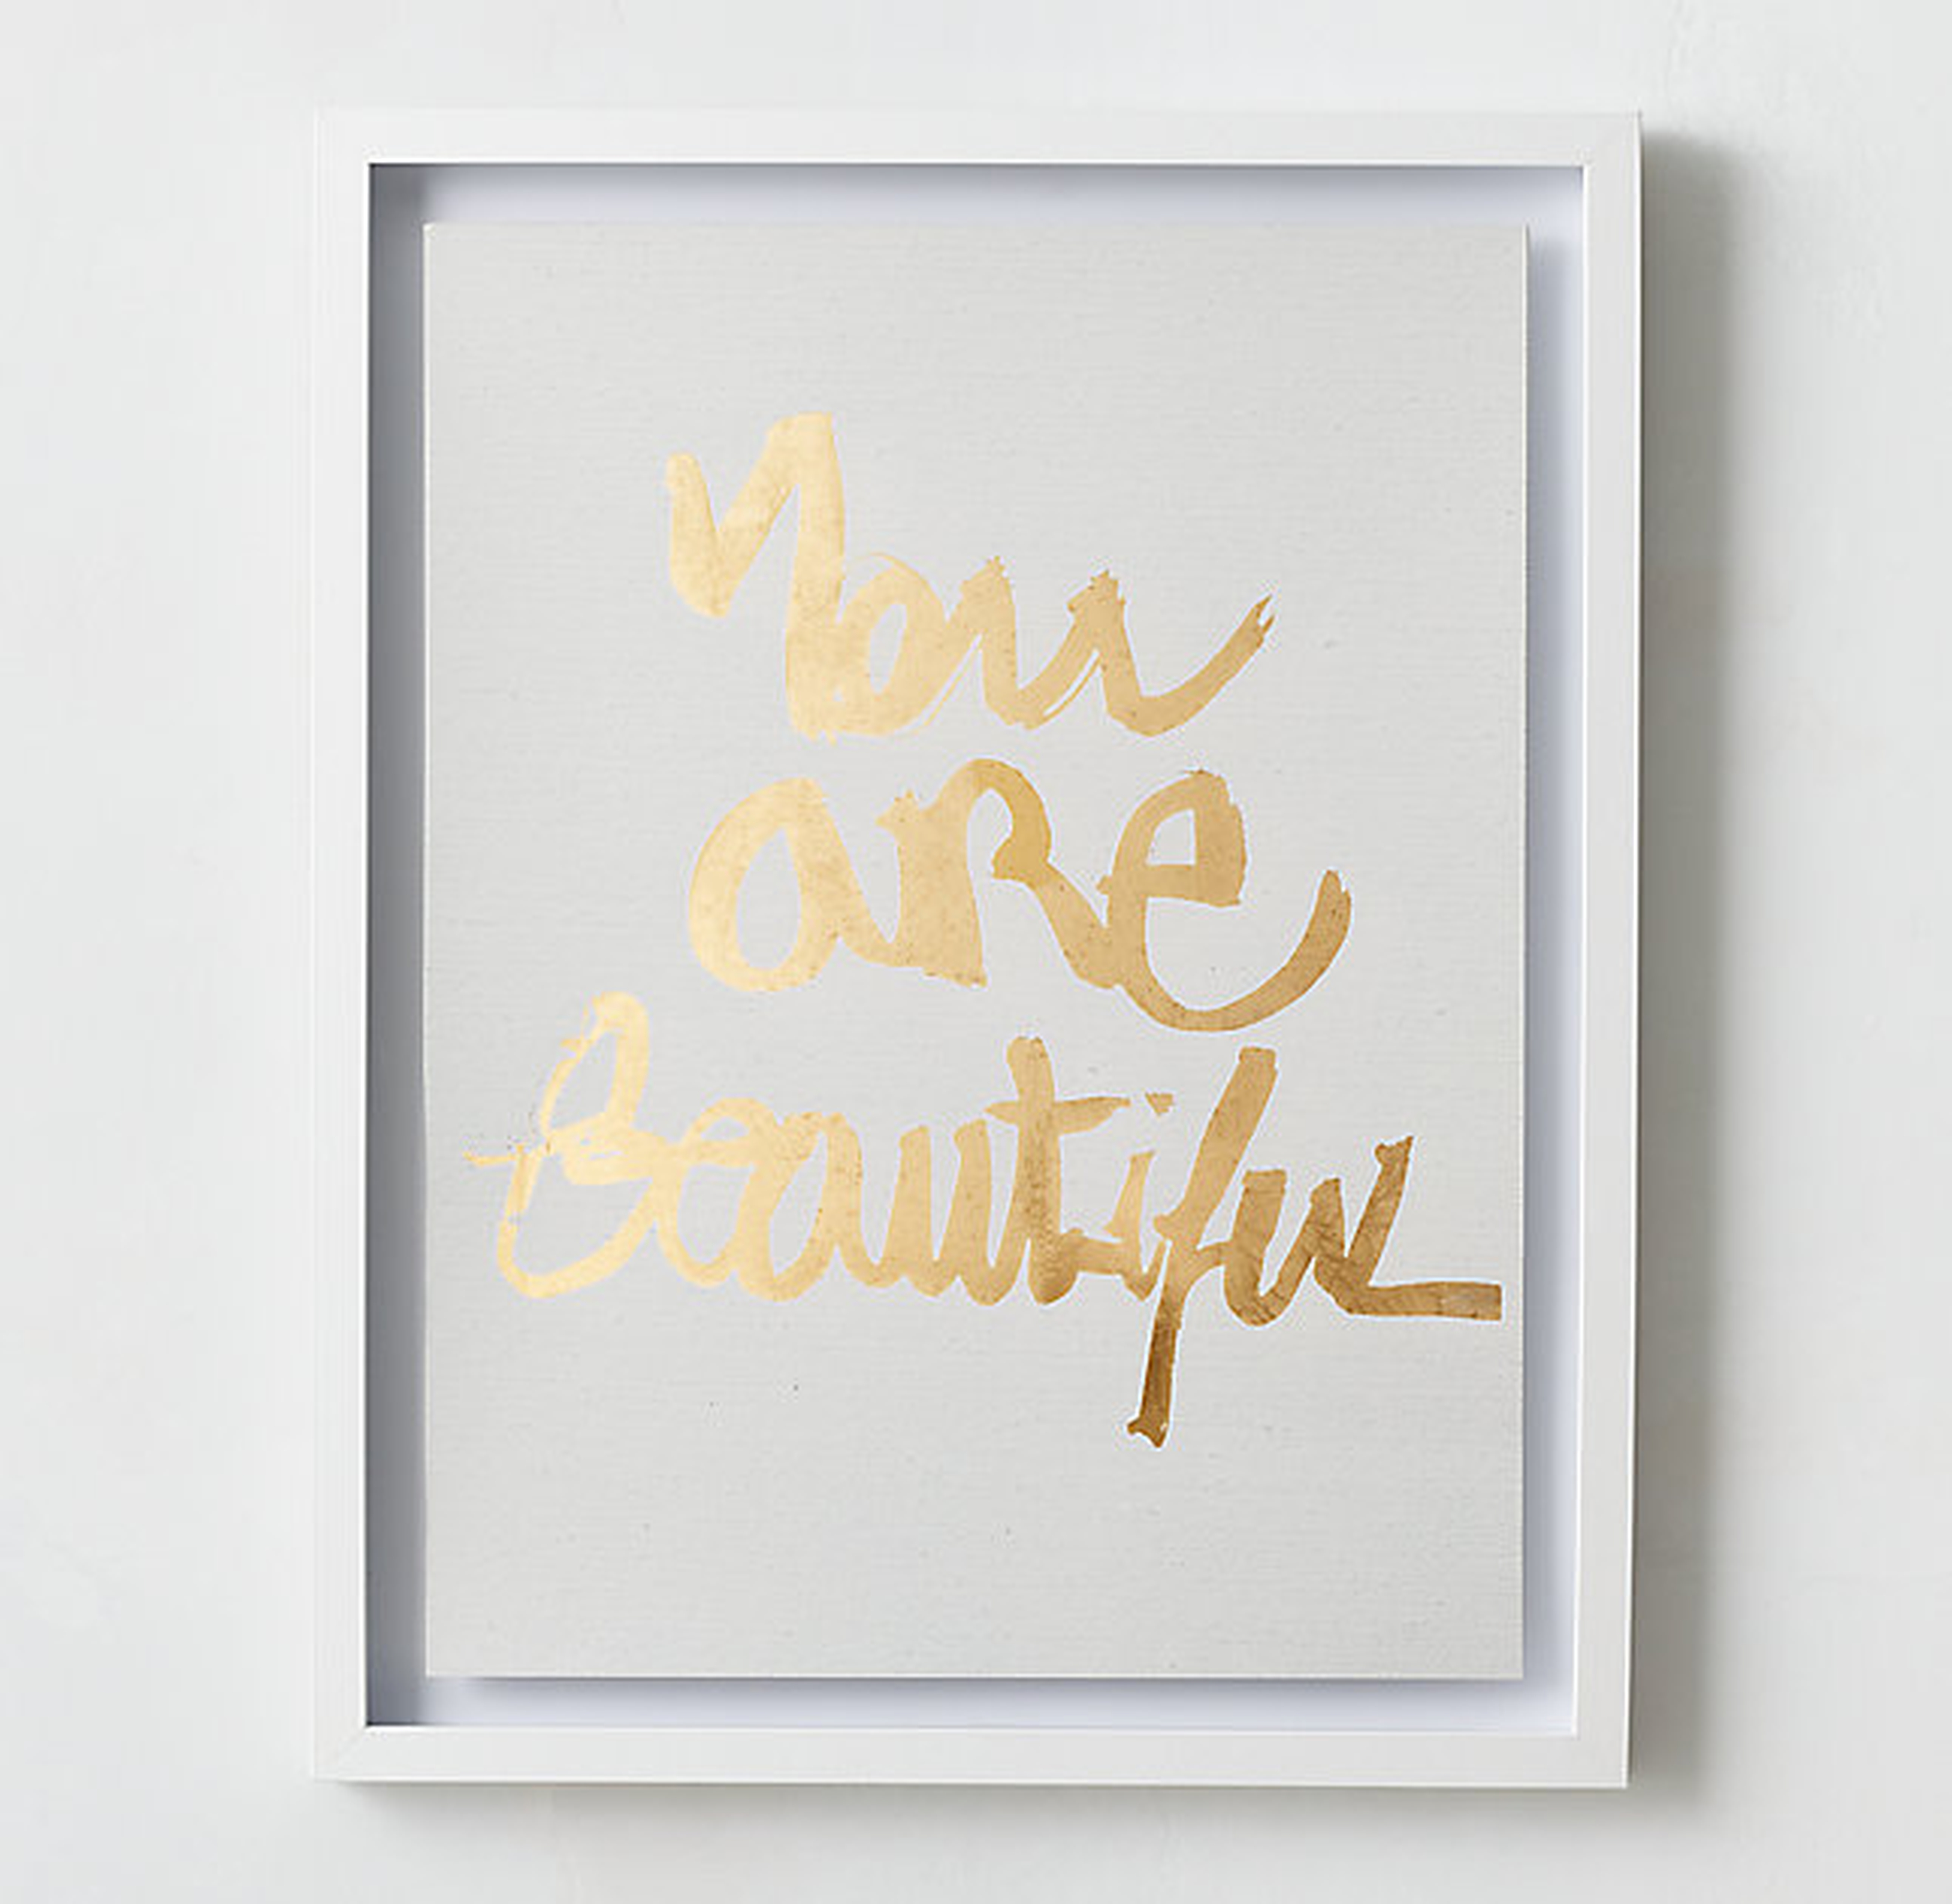 QUOTES METALLIC FOIL ART - YOU ARE BEAUTIFUL - 24x30 - White frame - RH Teen